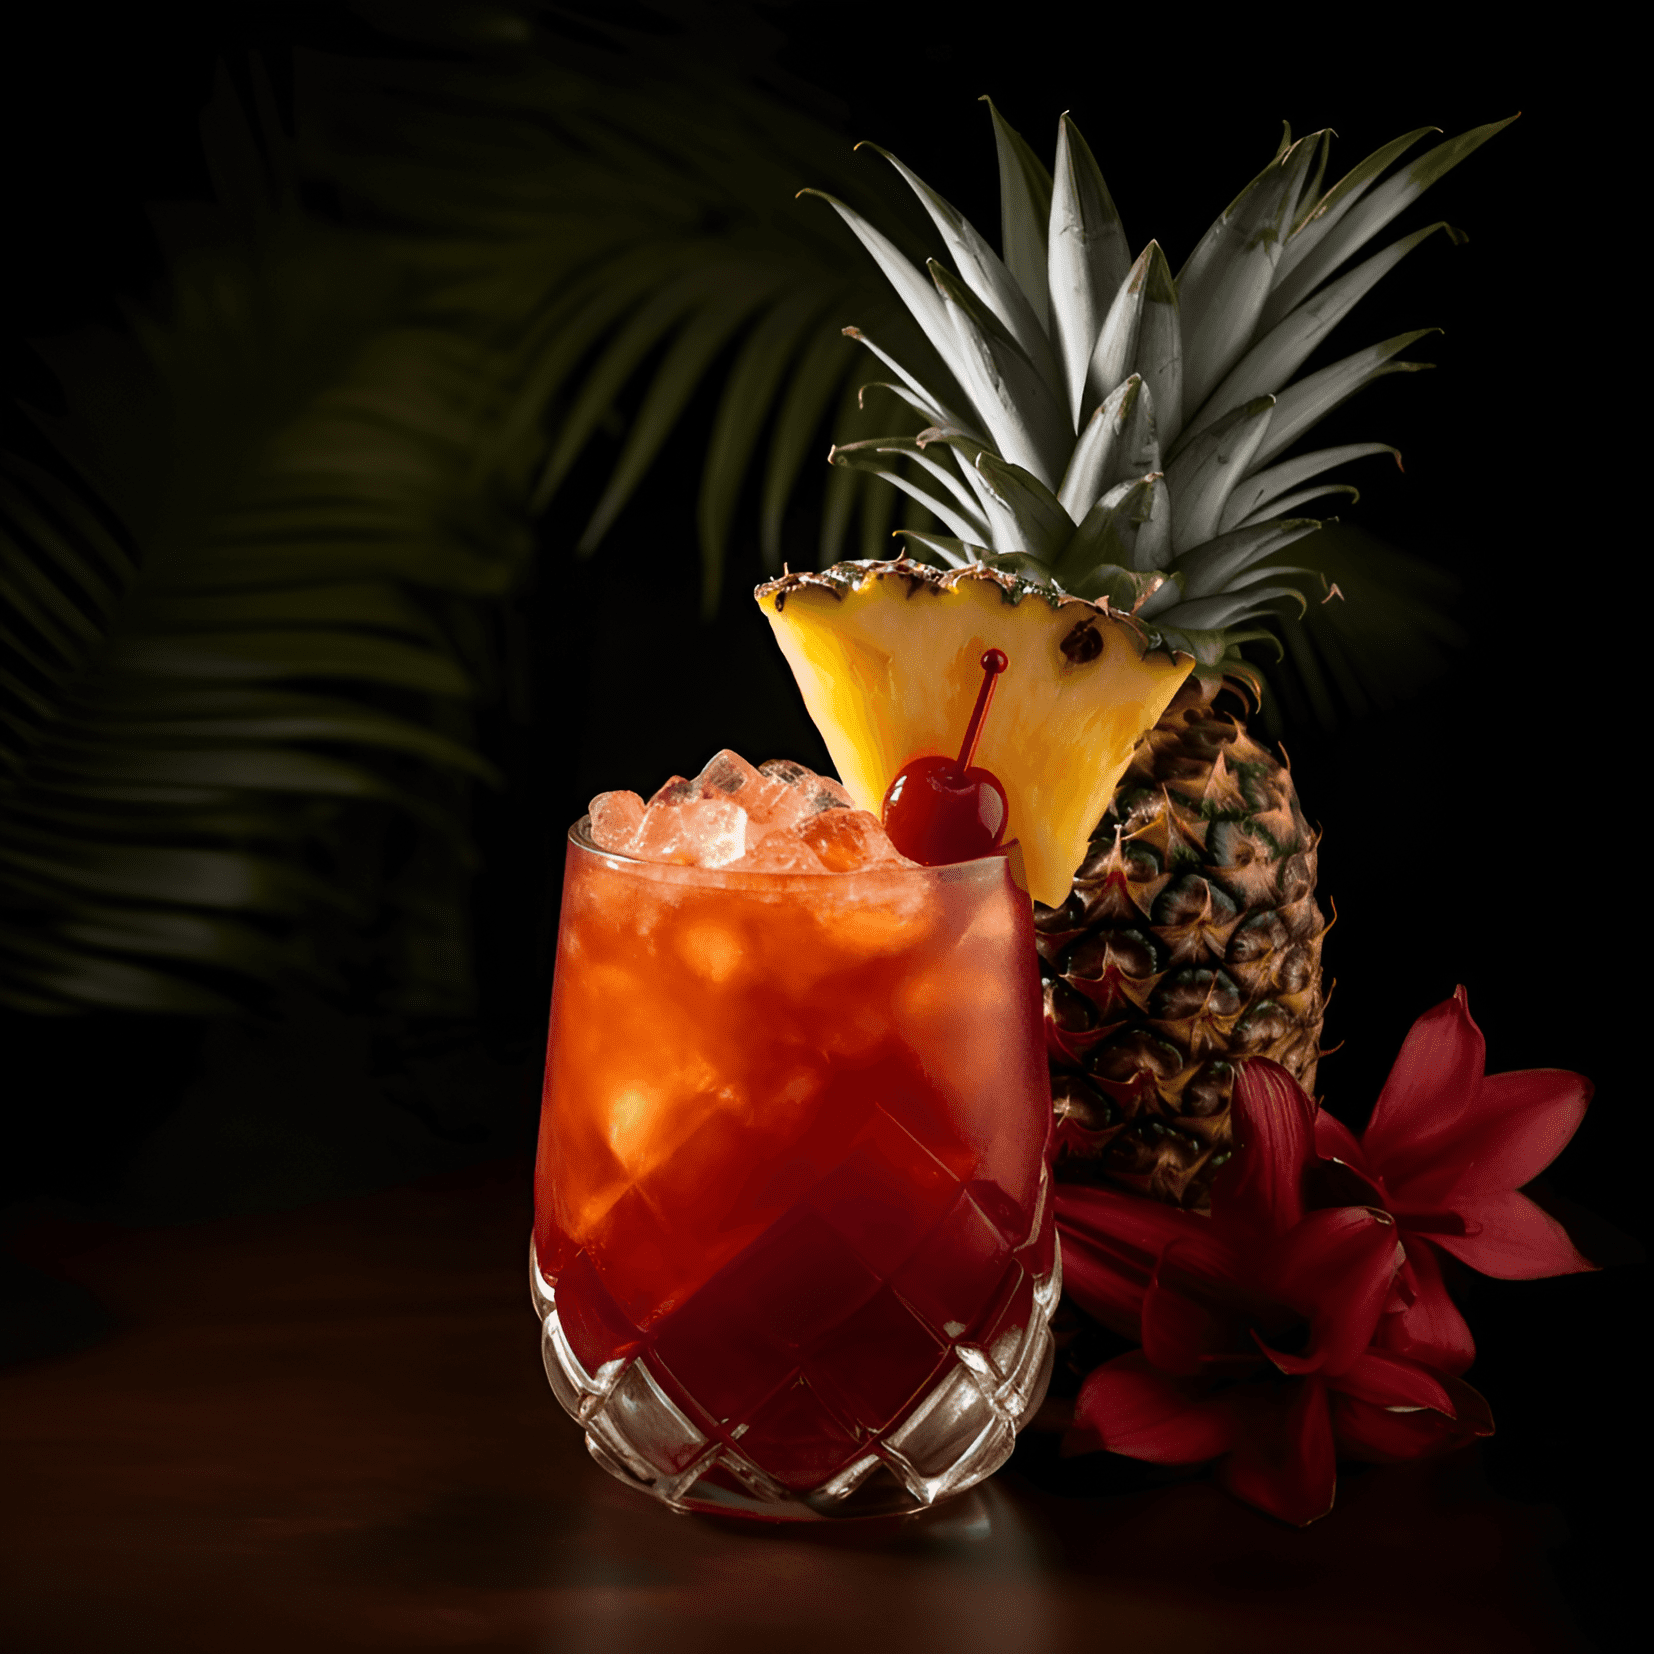 Jungle Bird Cocktail Recipe - The Jungle Bird has a complex and well-balanced taste profile, featuring sweet, sour, and bitter notes. The sweetness of the pineapple juice is balanced by the tartness of the lime juice and the bitterness of the Campari. The dark rum adds depth and warmth to the drink.